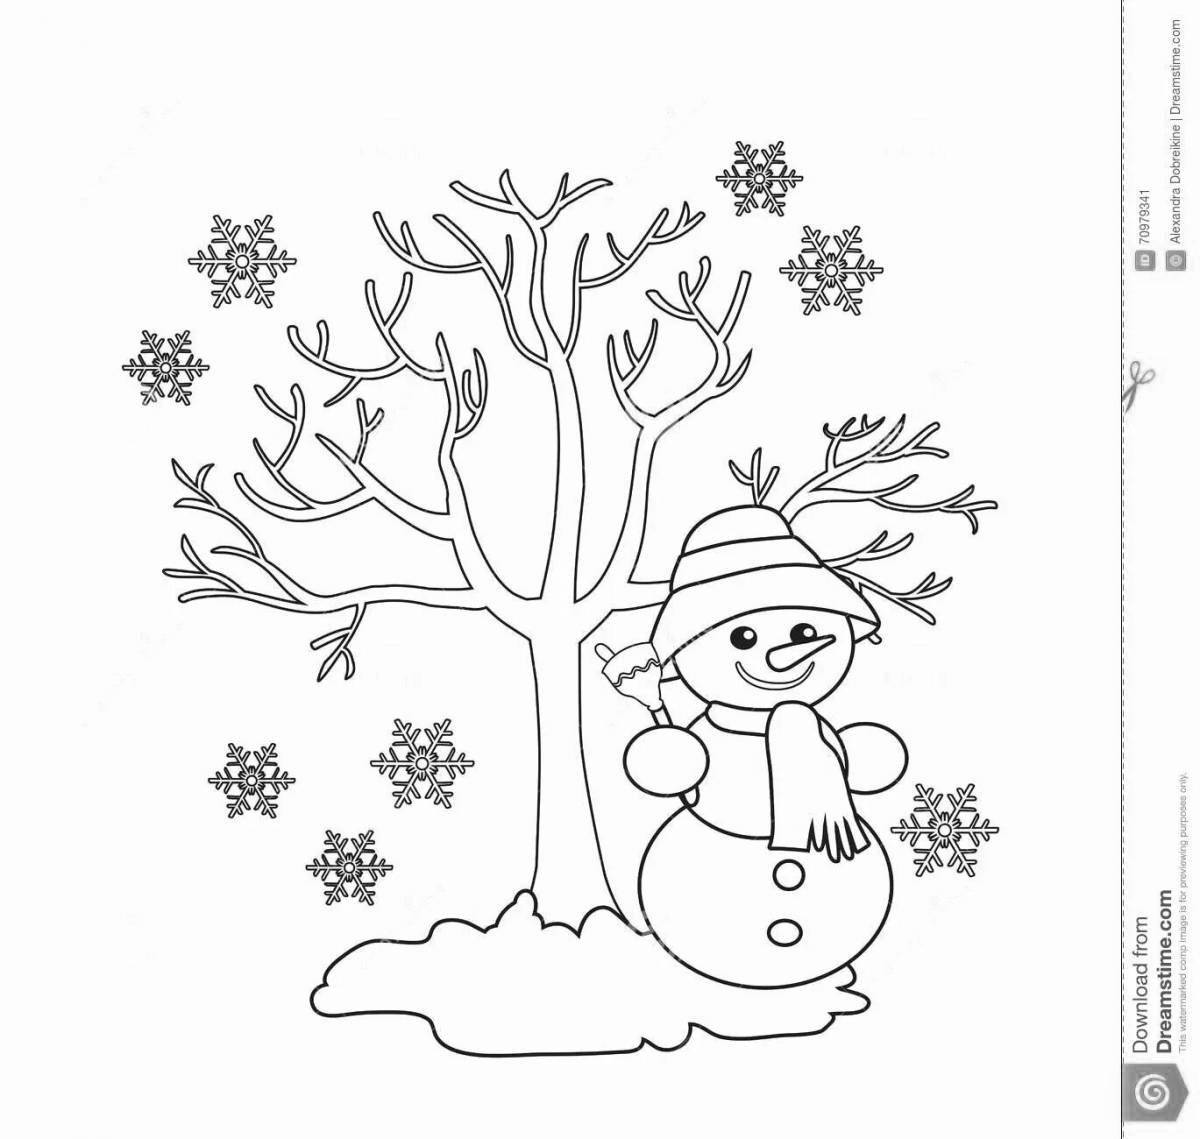 Magic winter tree coloring book for 3-4 year olds